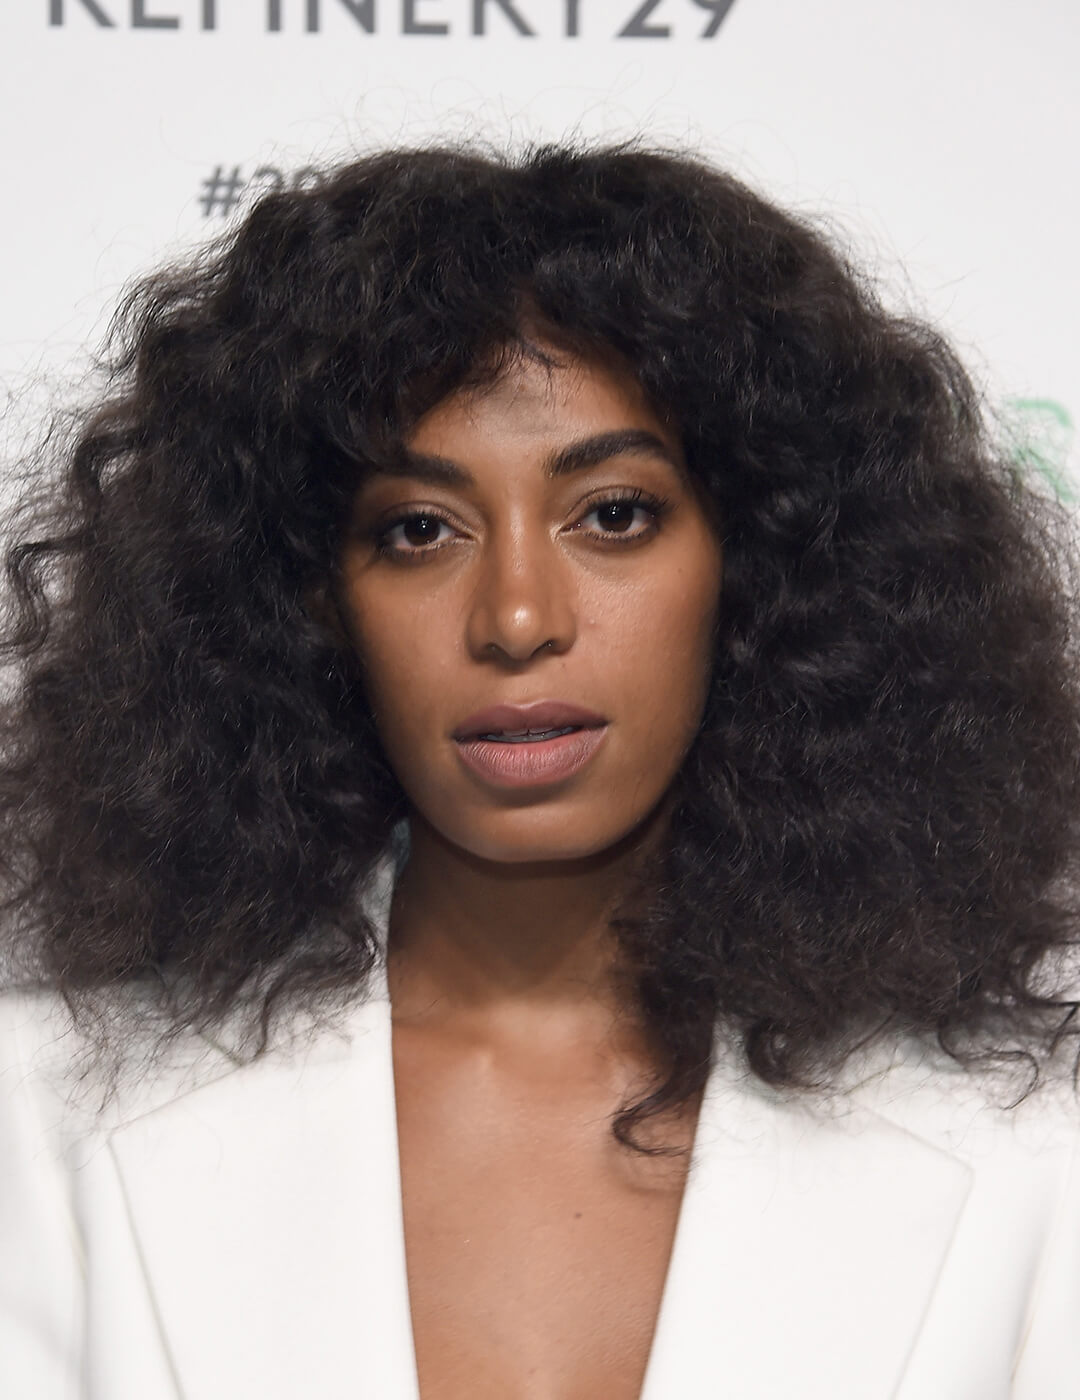 Solange Knowles rocking long, voluminuous curly hairstyle and white suit